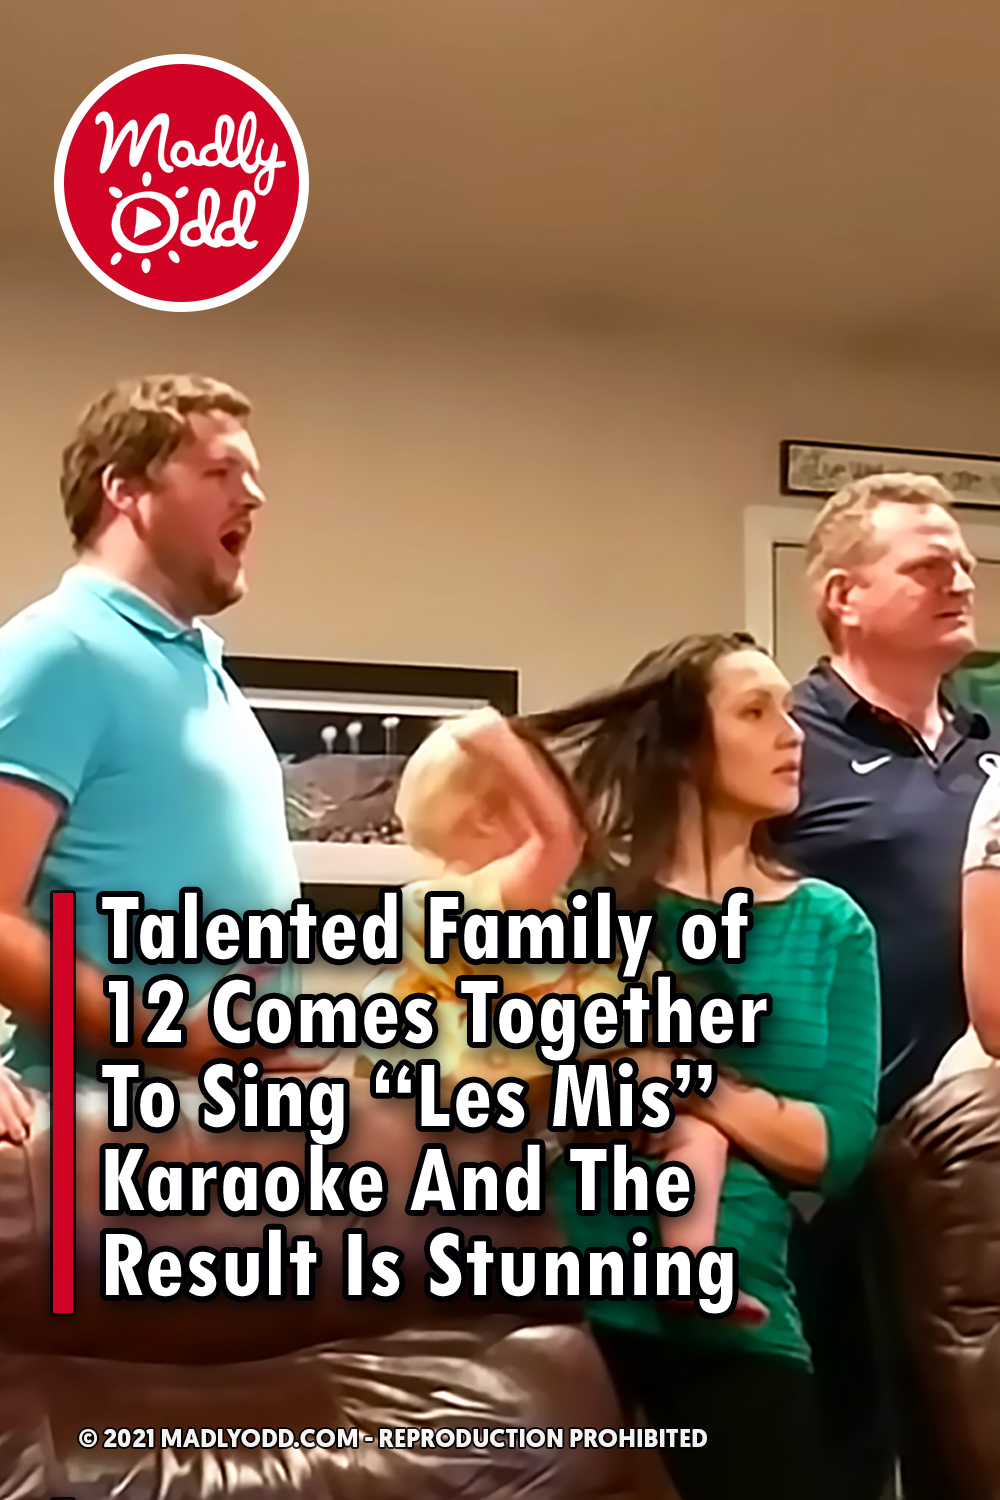 Talented Family of 12 Comes Together To Sing “Les Mis” Karaoke And The Result Is Stunning